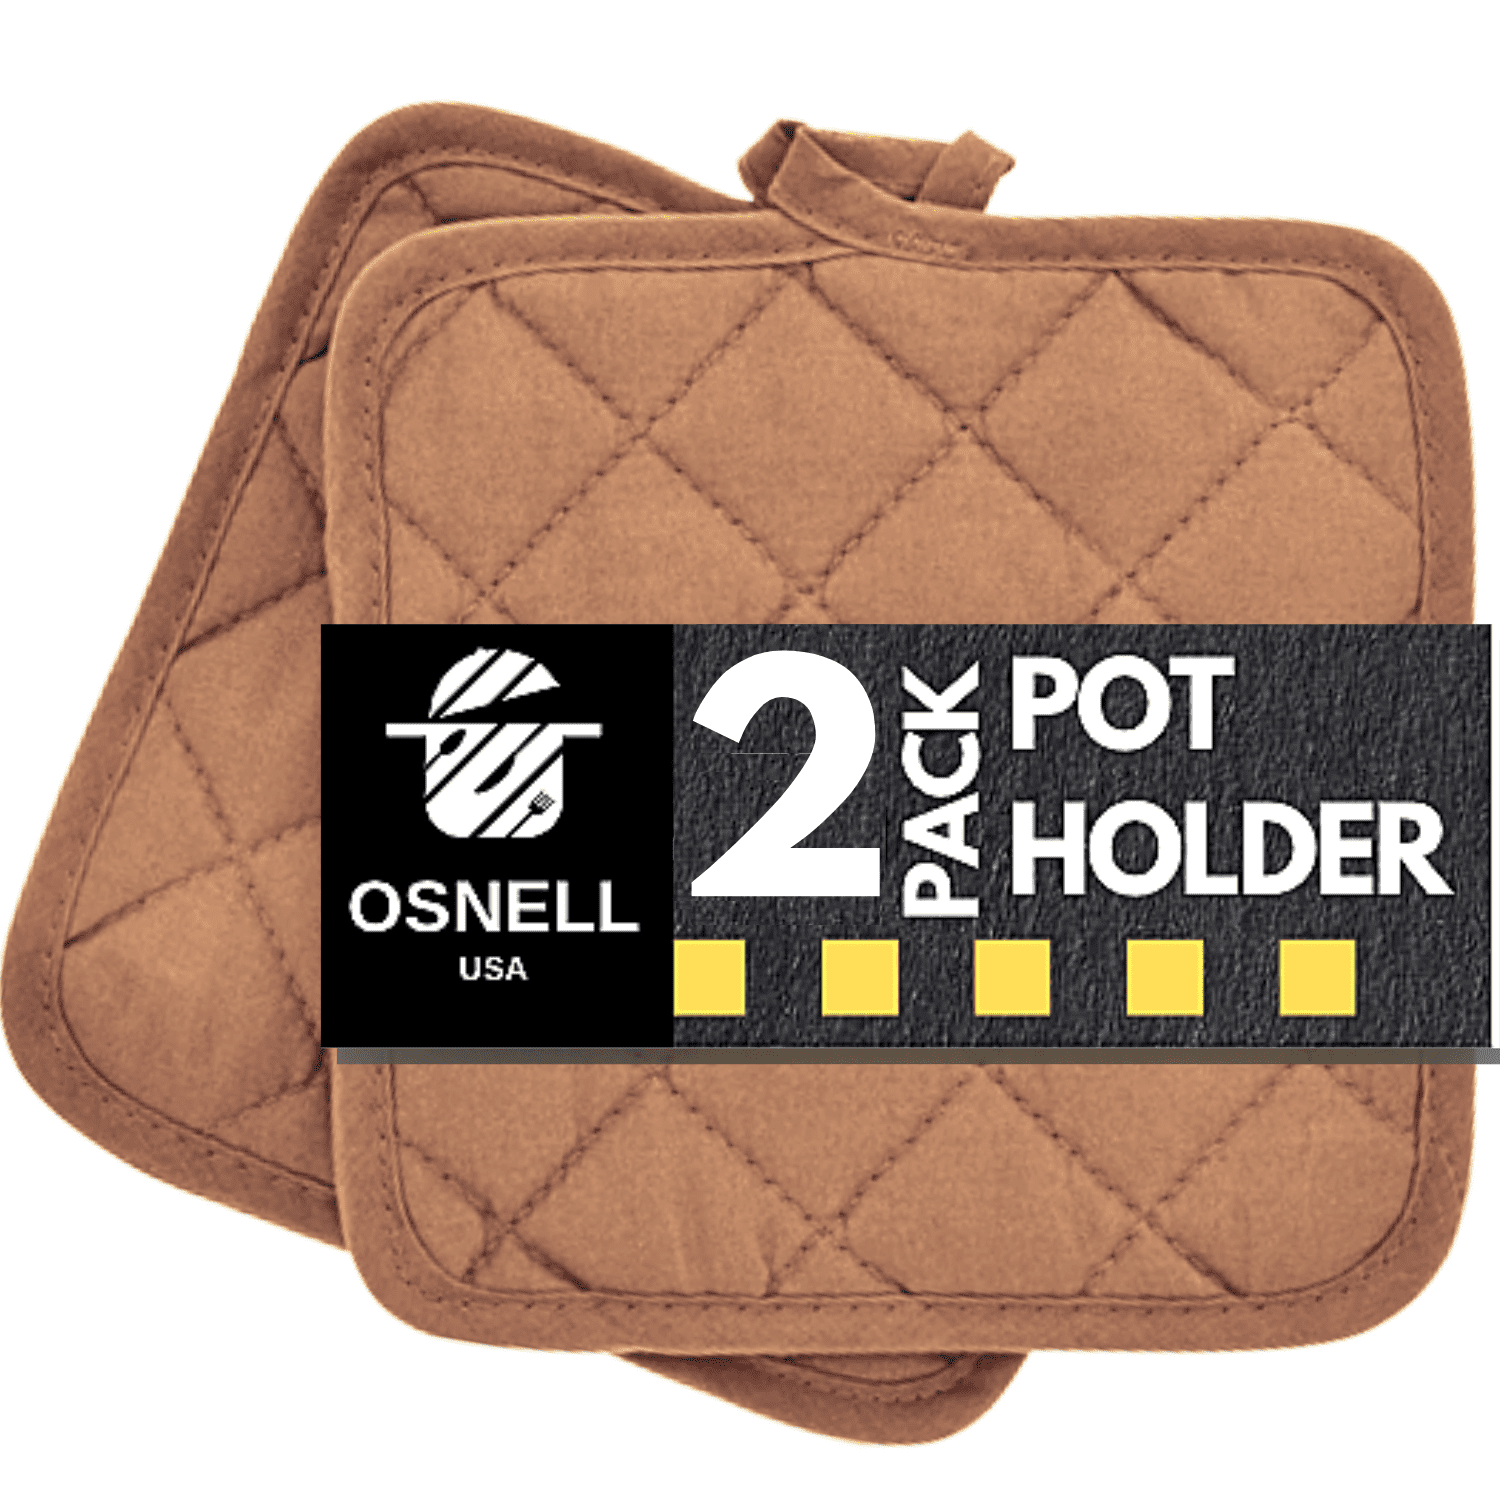 Pot Holders 7 Square Solid Color (Pack of 4) - Black - Cotton Pot Holders  for Kitchen by Osnell USA 